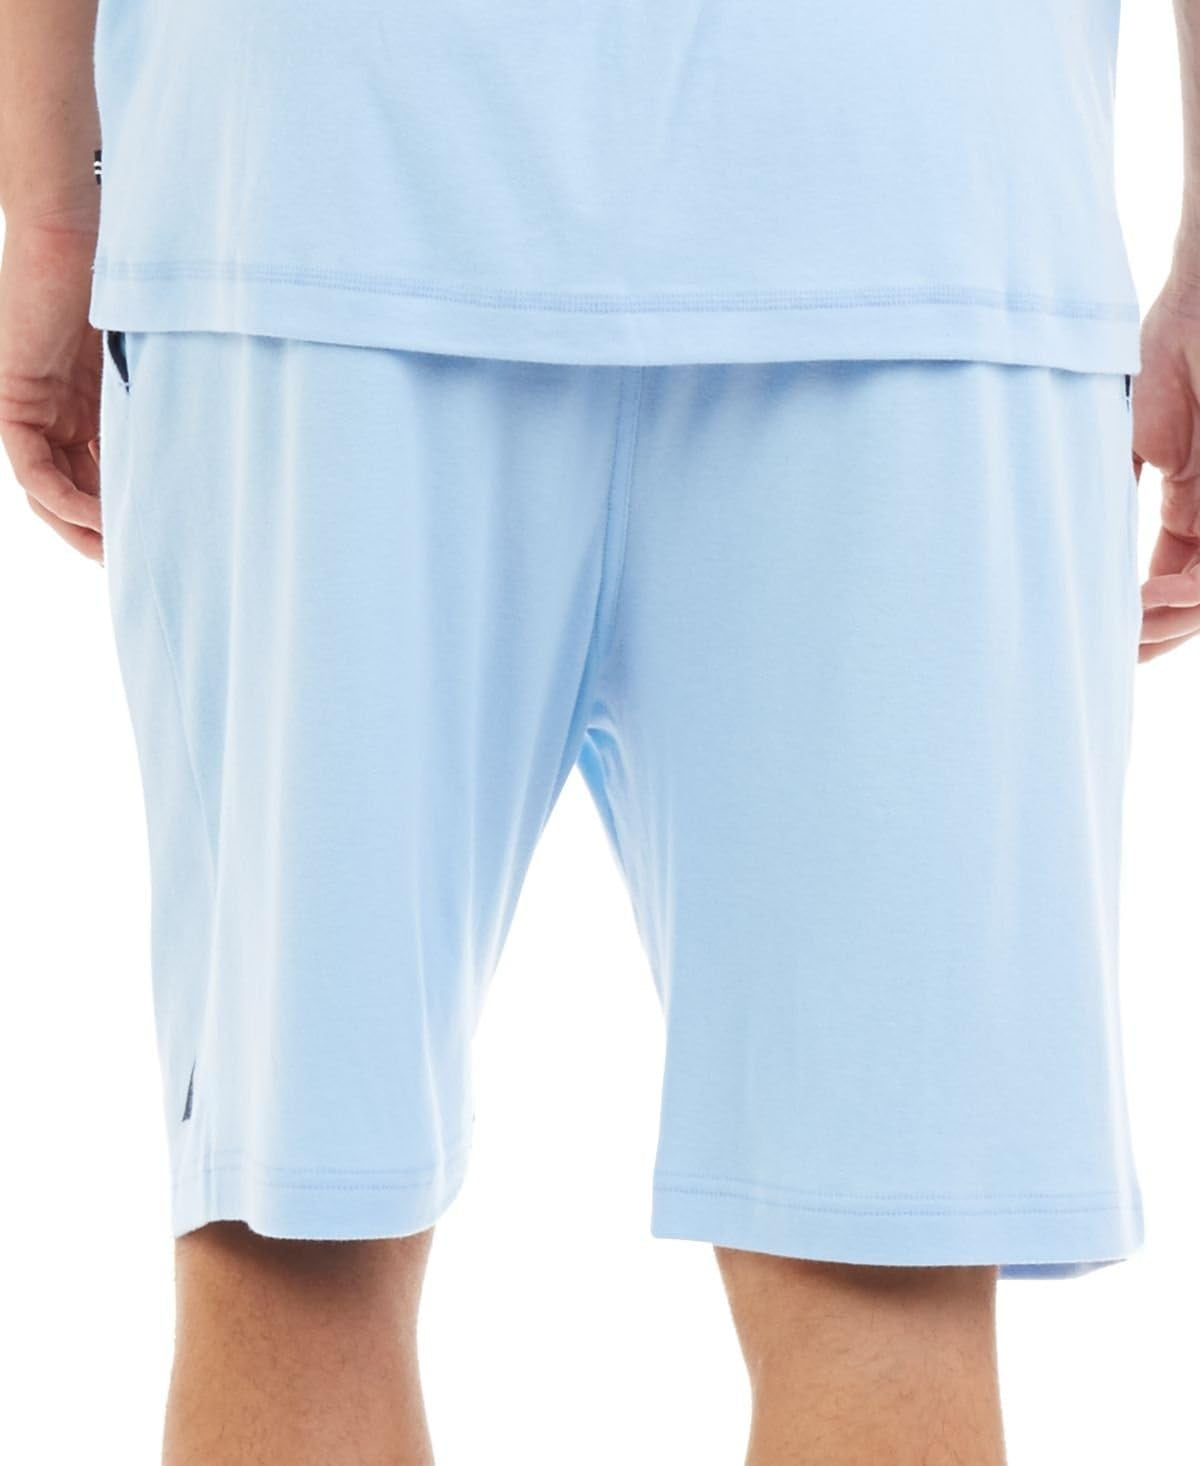 "Indulge in Unmatched Comfort with our Men's Soft Knit Lounge Shorts - Elevate Your Relaxation in Stylish Luxury!"